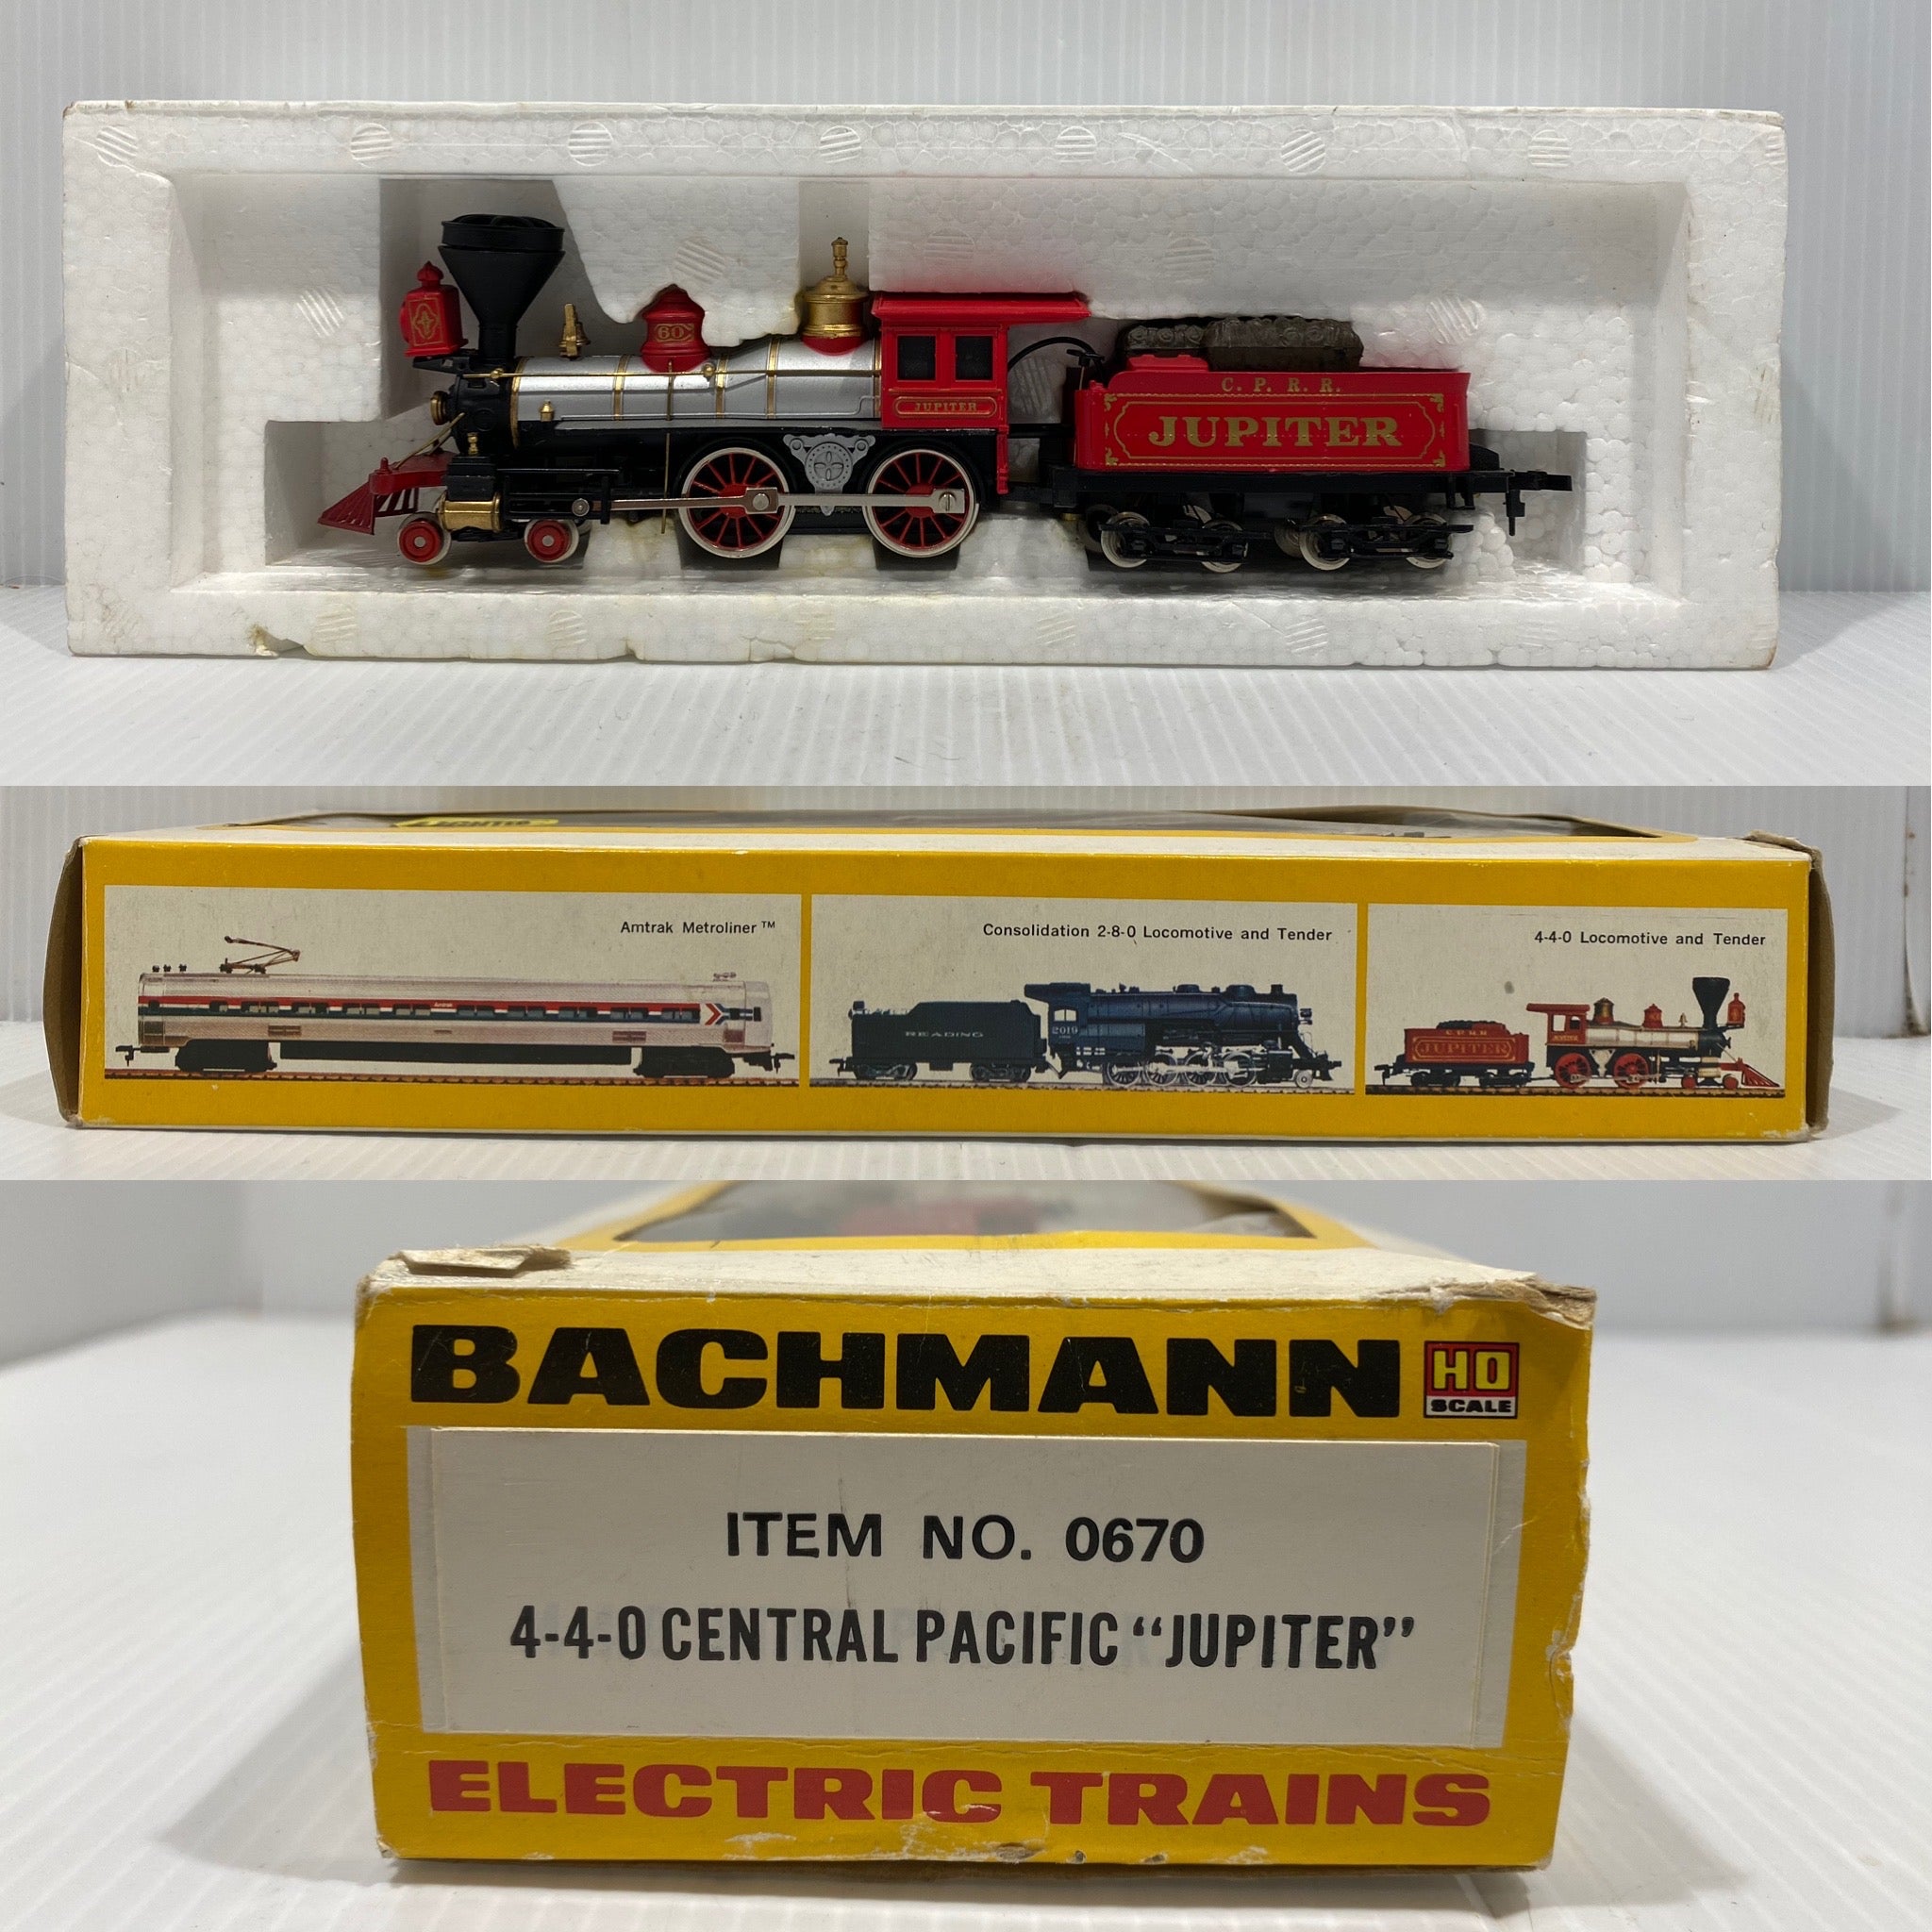 Bachmann USA 0670BAC-PO 4-4-0 'Jupiter' of the Central Pacific Railroad